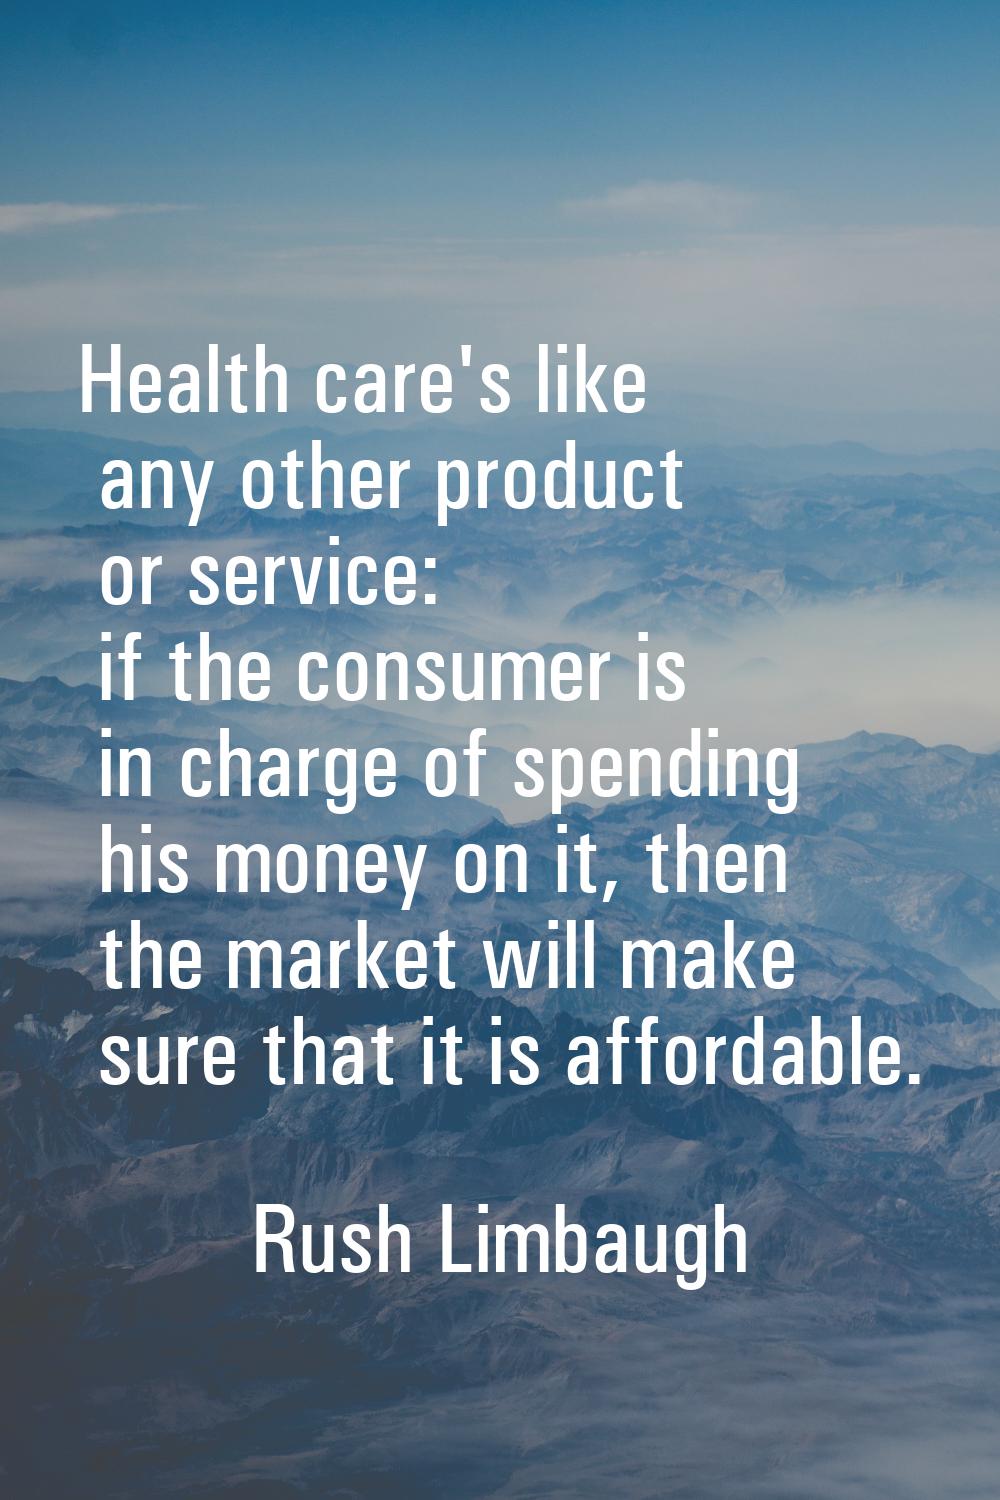 Health care's like any other product or service: if the consumer is in charge of spending his money